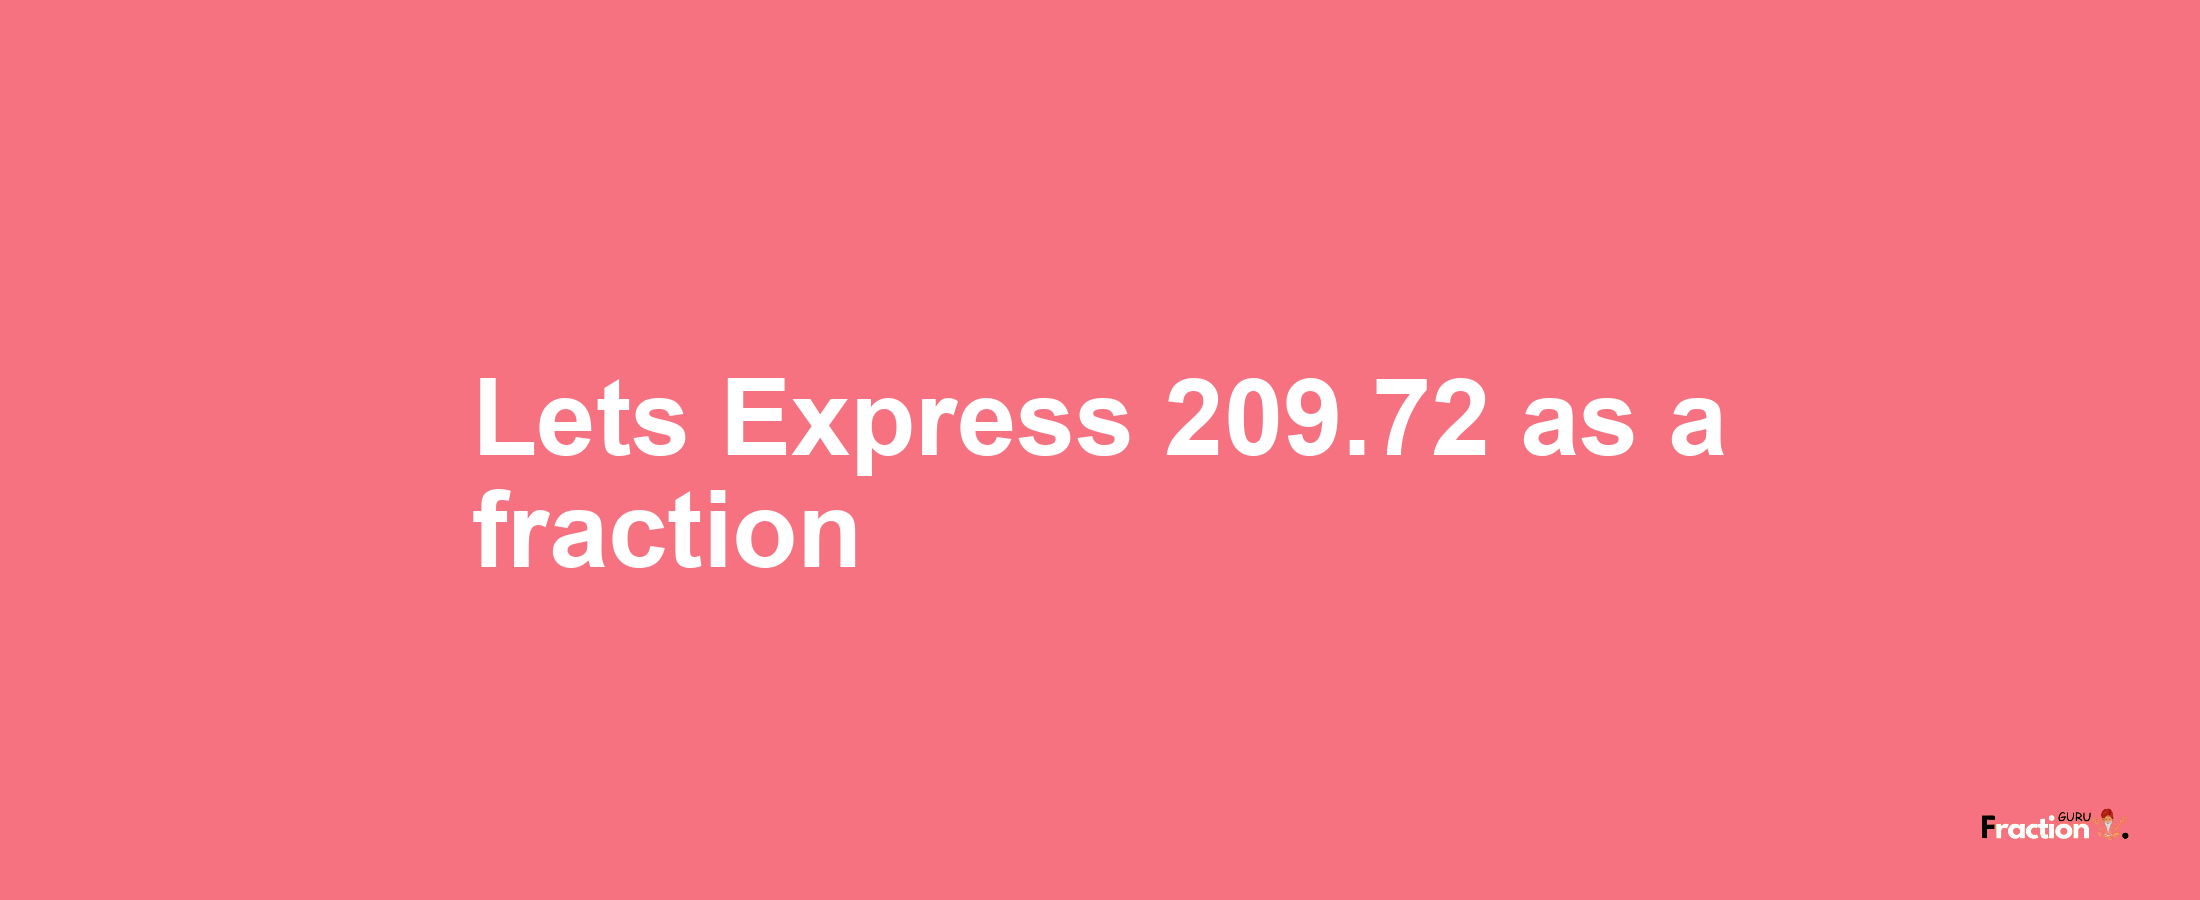 Lets Express 209.72 as afraction